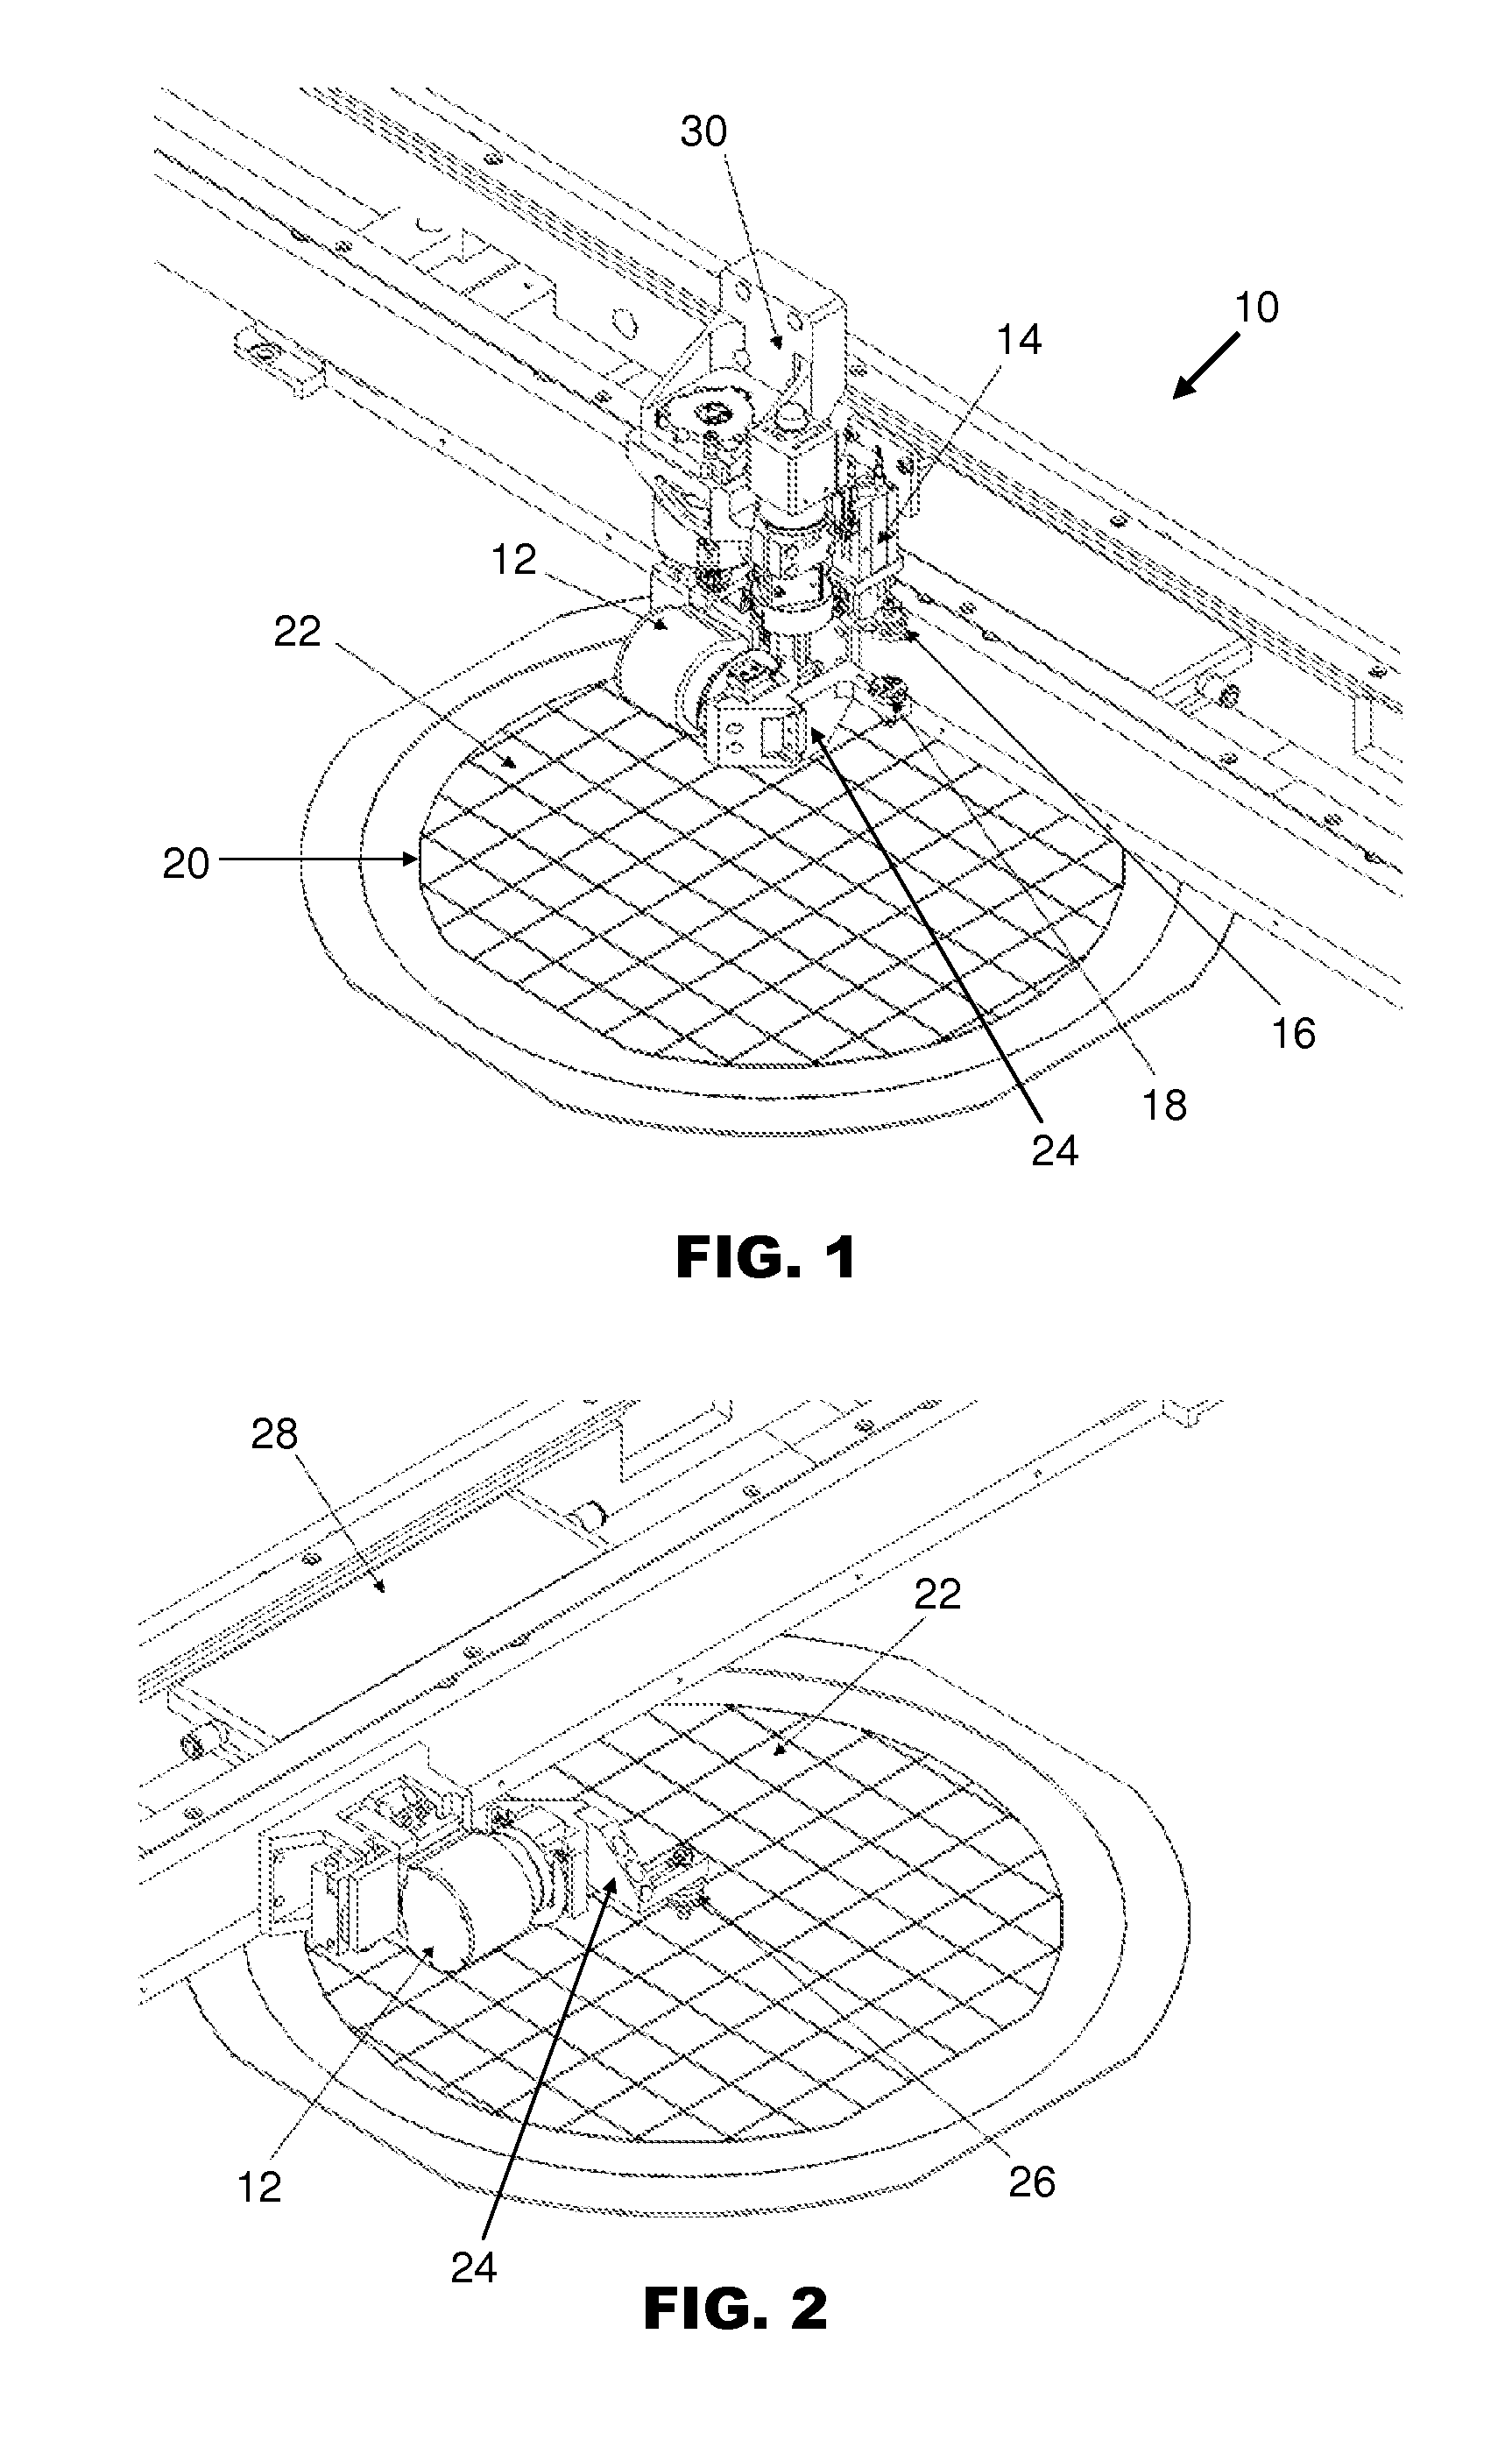 Flip arm module for a bonding apparatus incorporating changeable collet tools